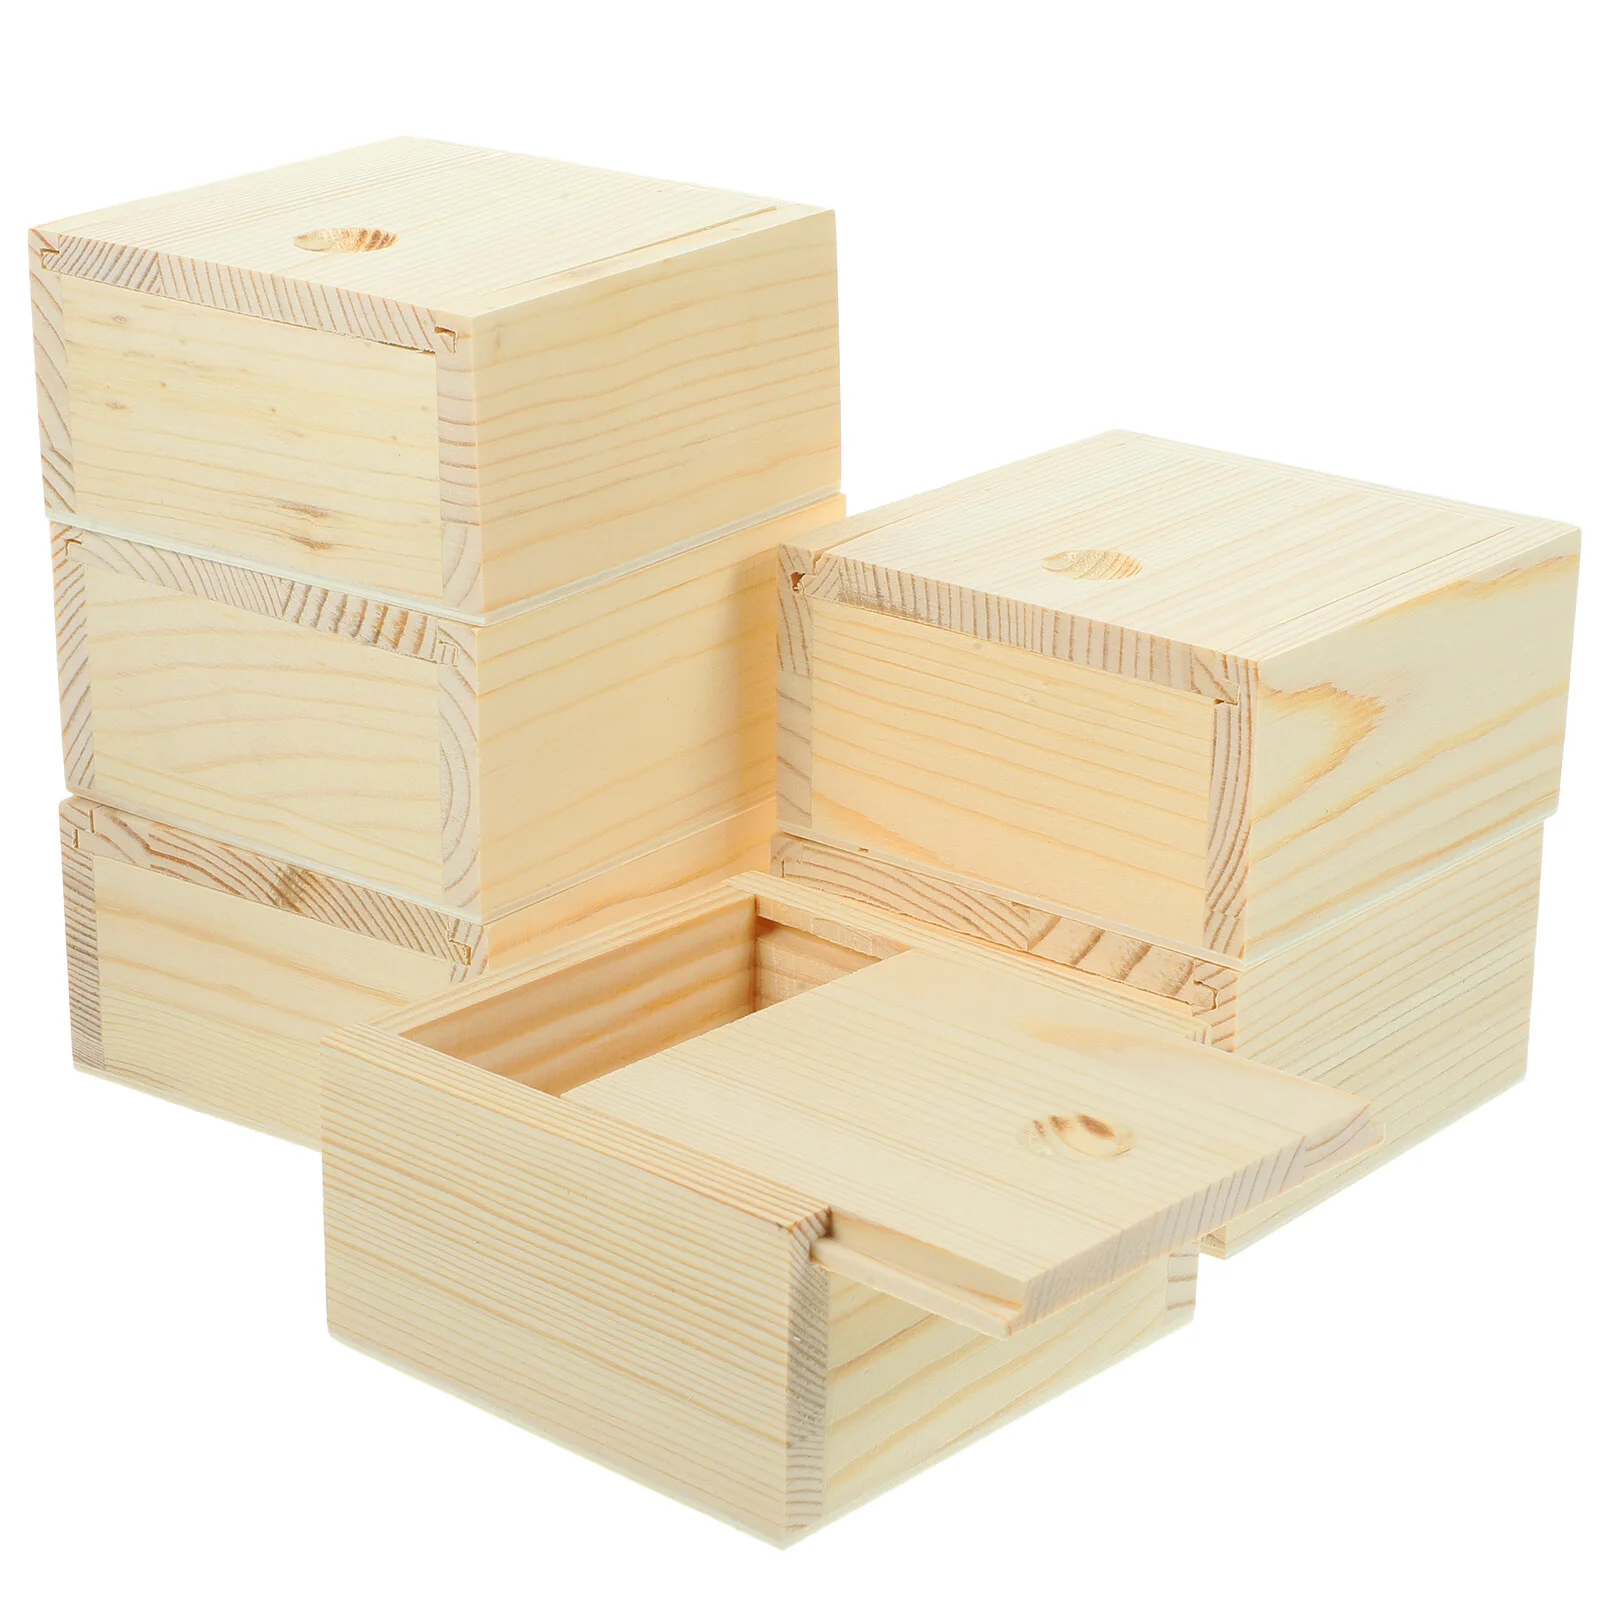 

10 Pcs Small Wooden Box Gift Jewelry Multipurpose Container Items Organizer Desktop Simple Styled Travel Square Storage